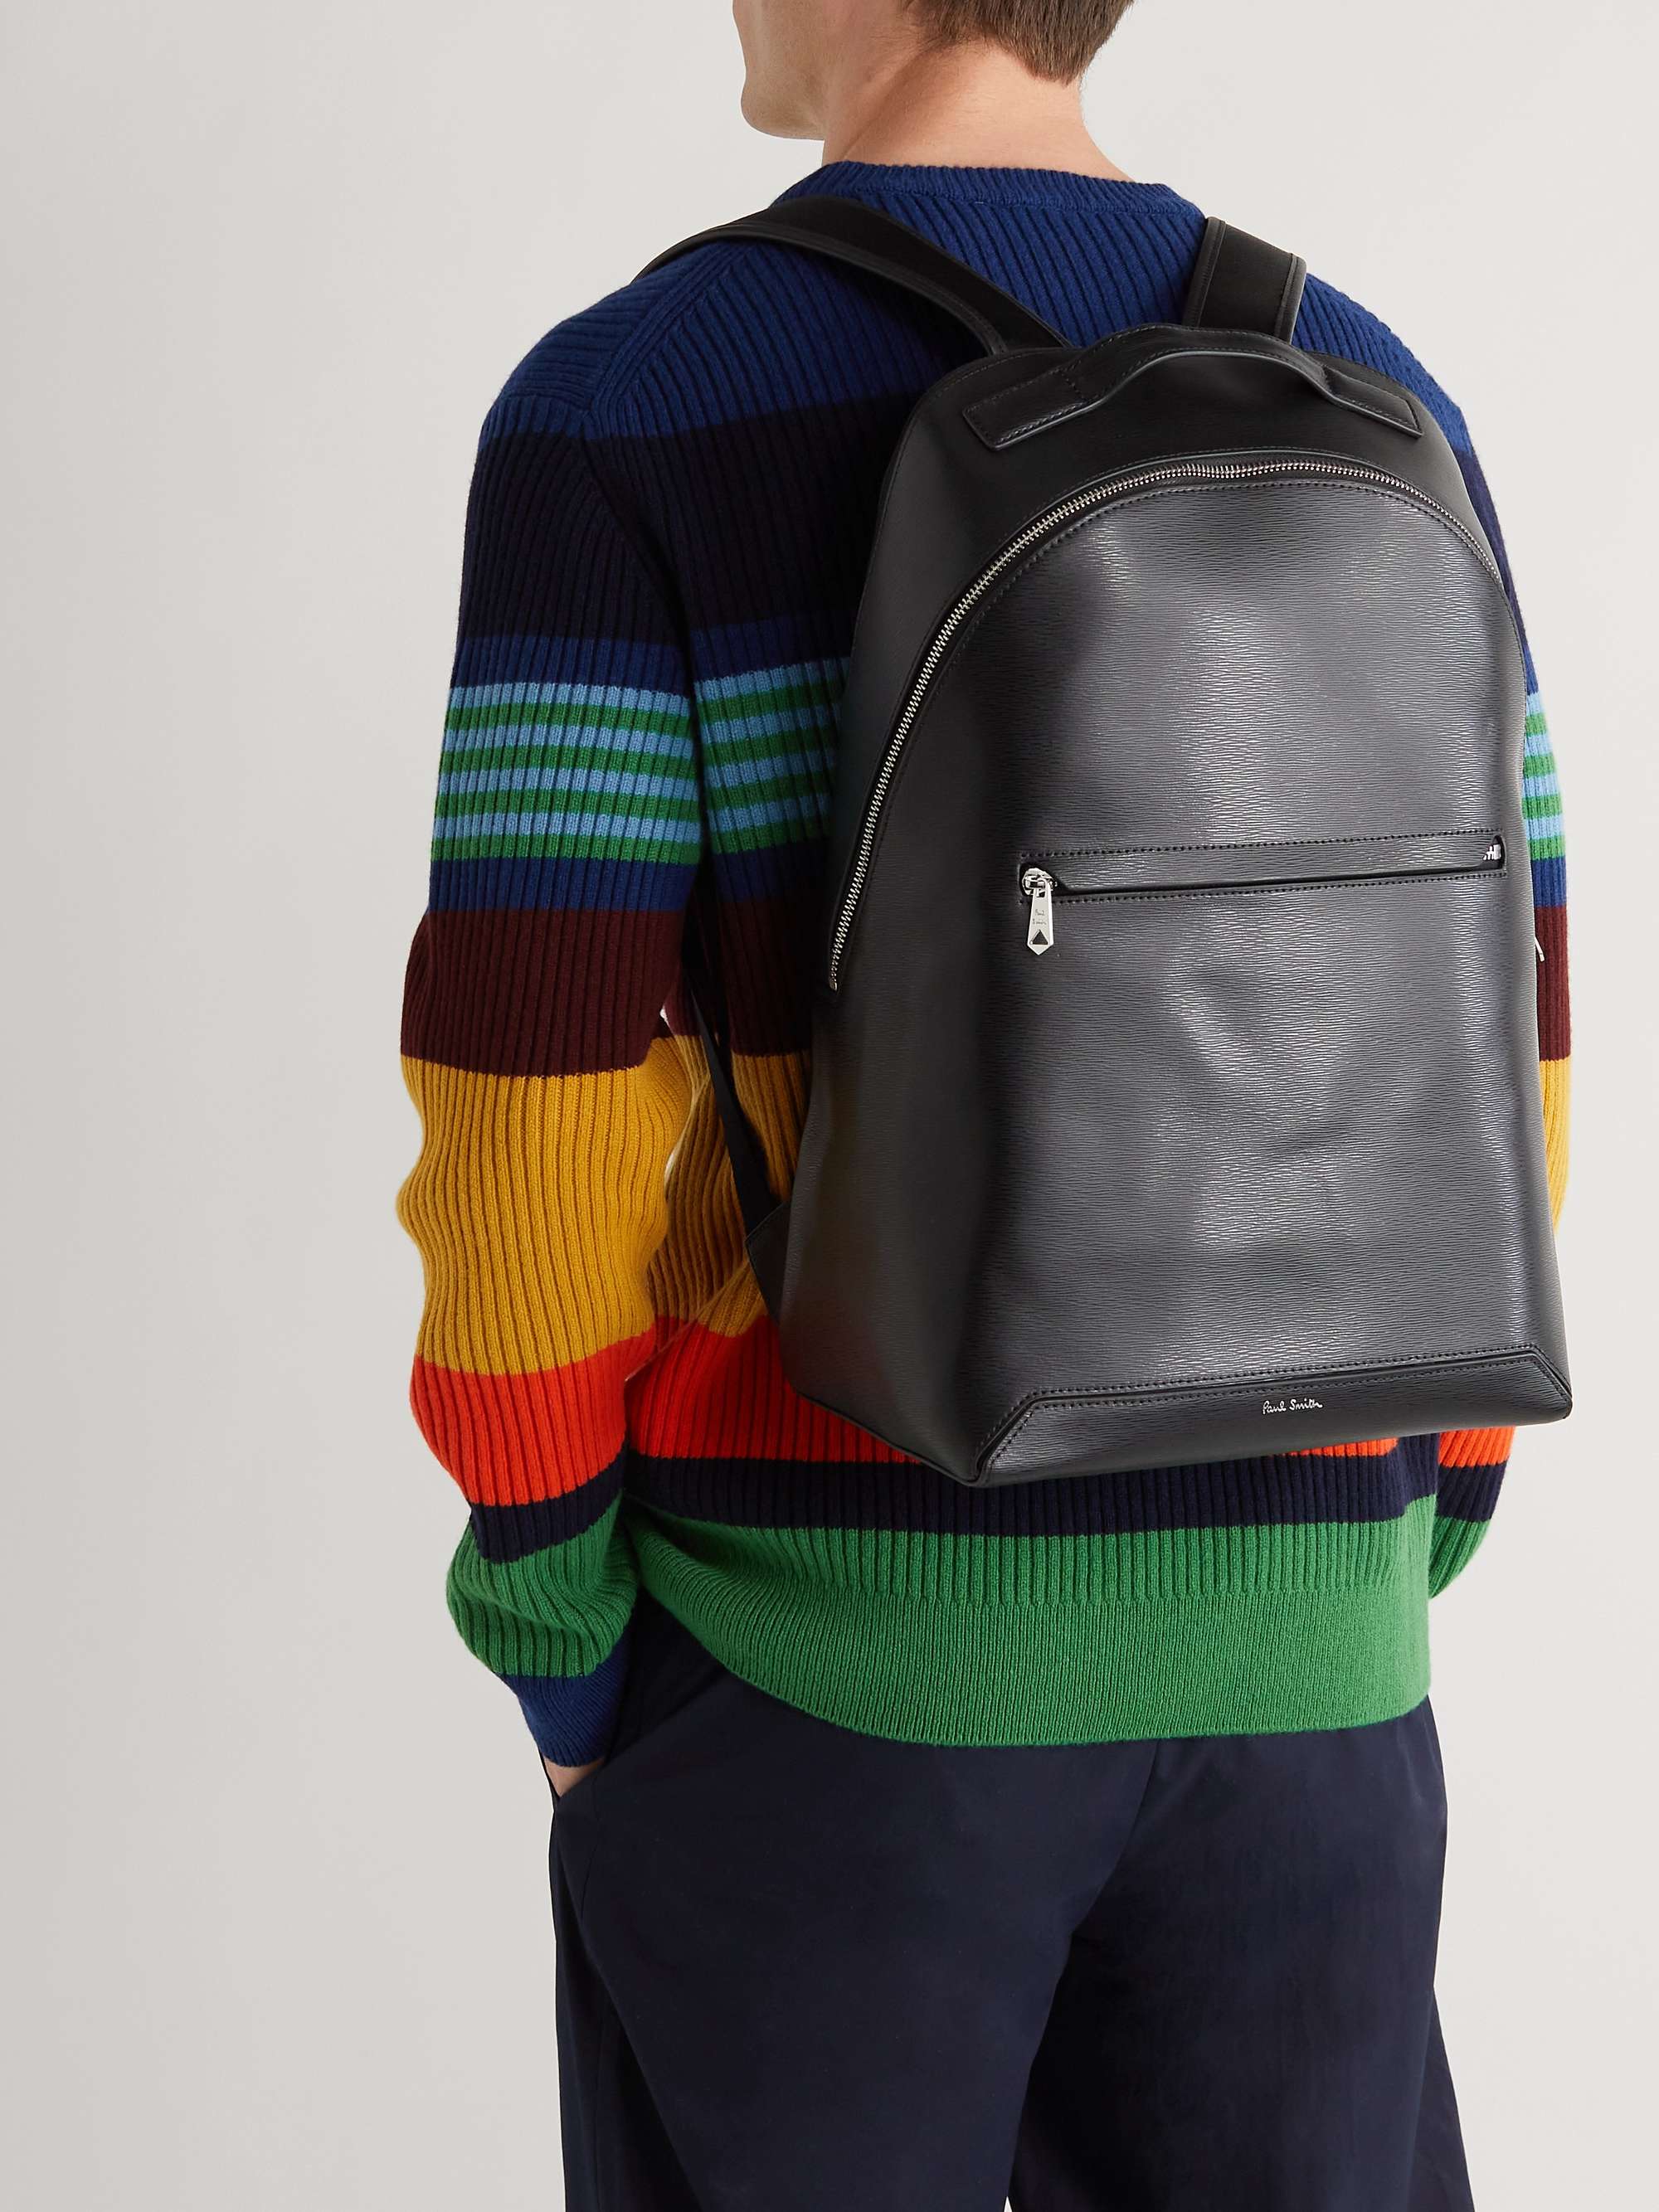 PAUL SMITH Embossed Leather Backpack